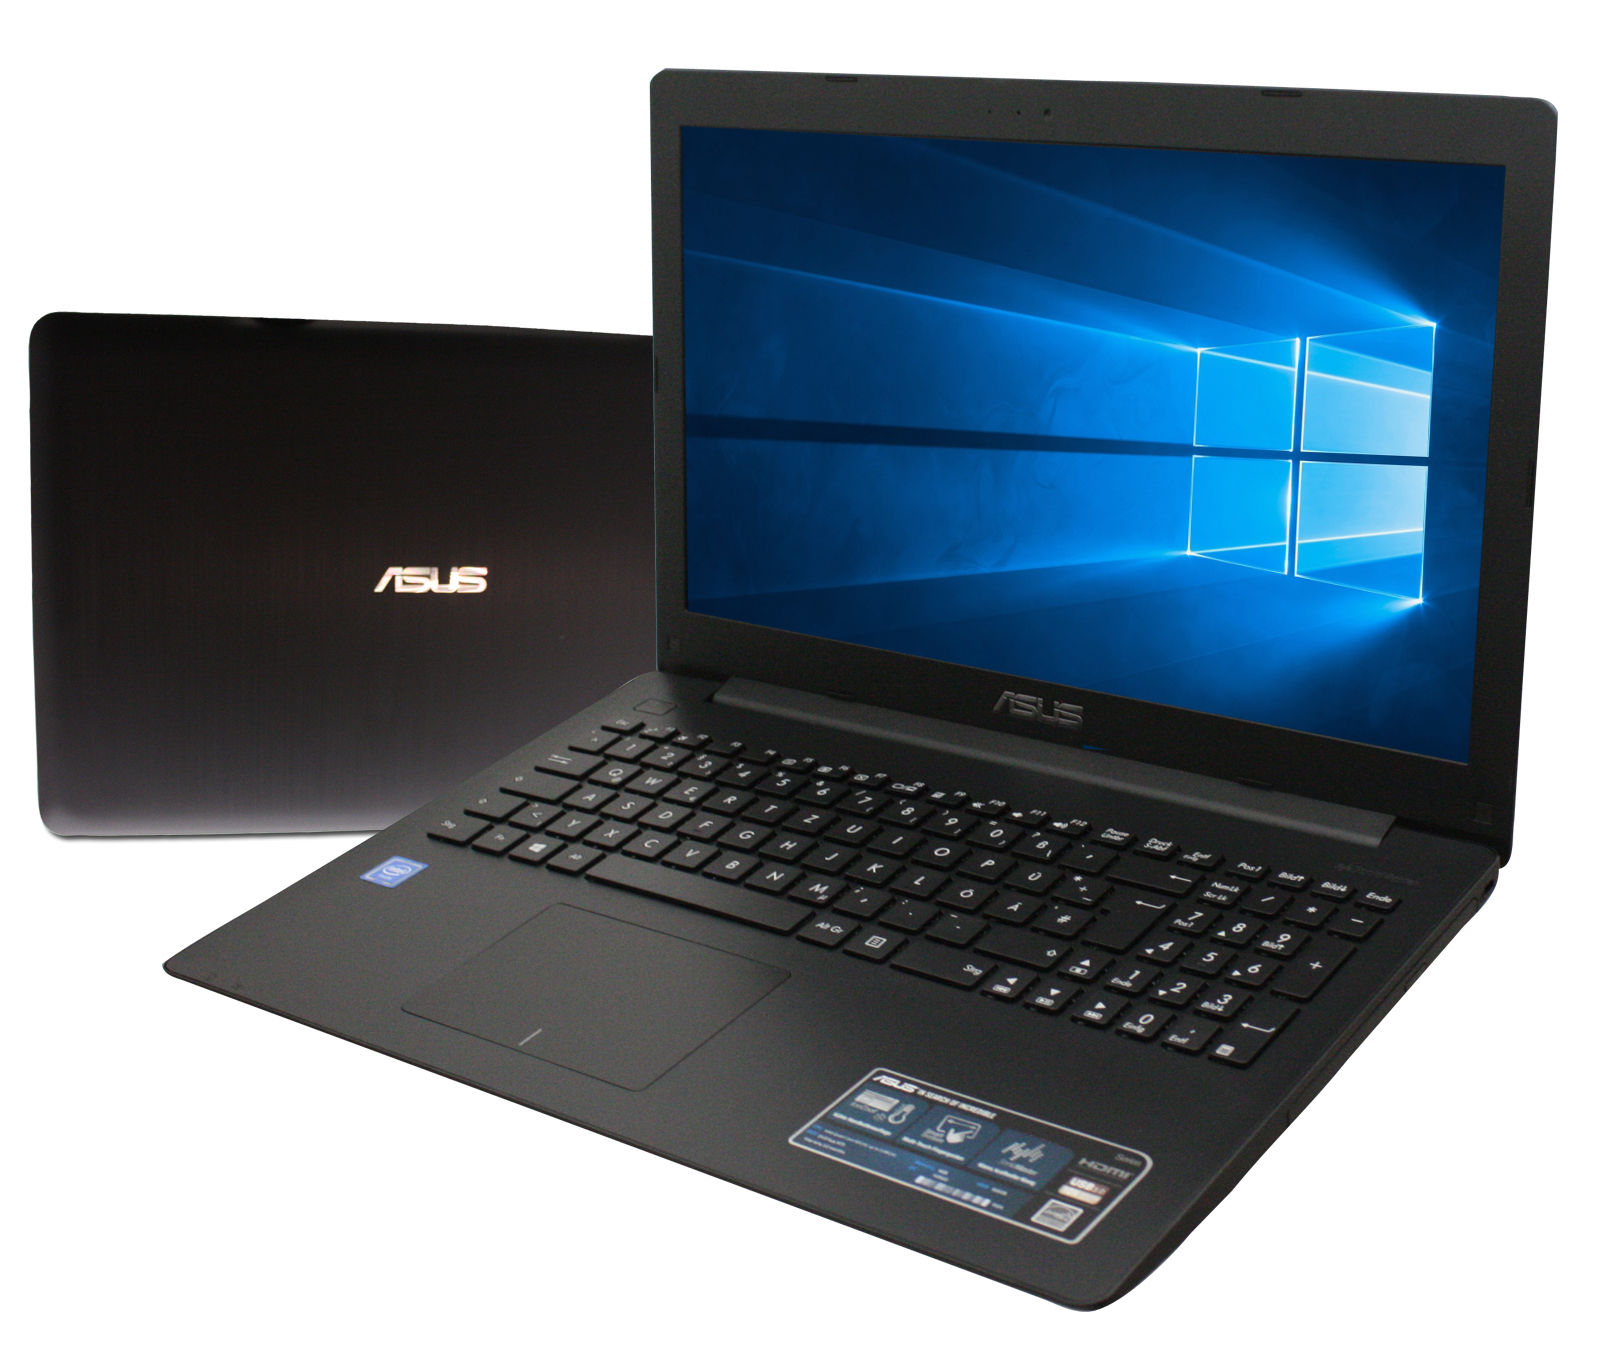 ASUS Notebook 17 Zoll - Dual Core - 2 x 2,48 GHz - 1T  HDD - 4 GB - Schwarz -WIN